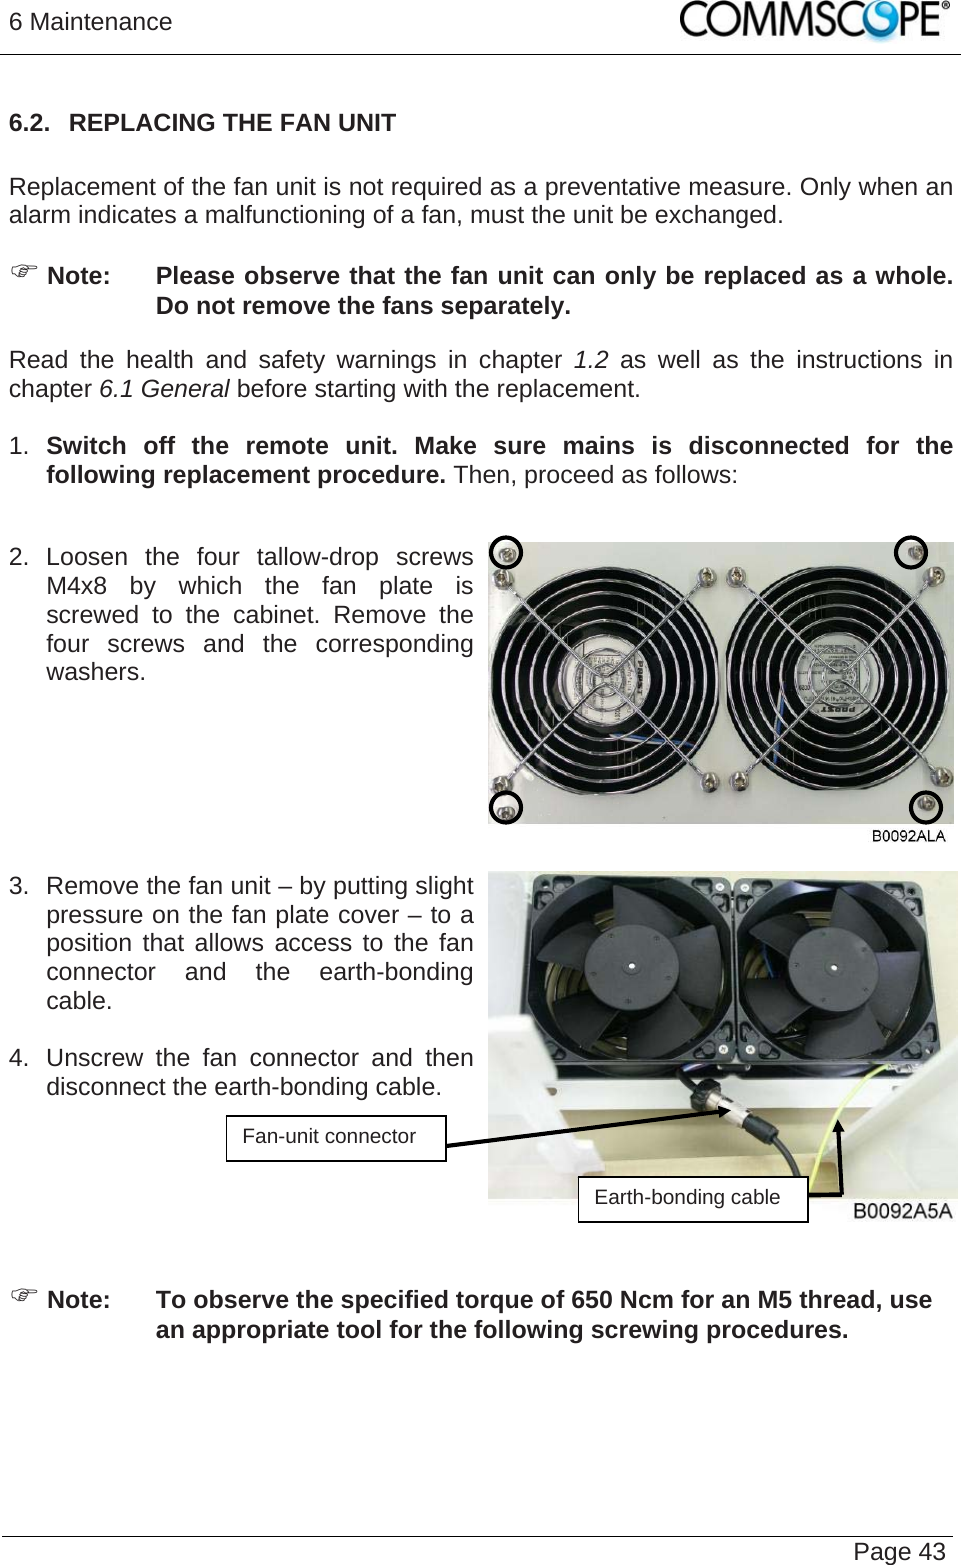 6 Maintenance   Page 436.2.  REPLACING THE FAN UNIT  Replacement of the fan unit is not required as a preventative measure. Only when an alarm indicates a malfunctioning of a fan, must the unit be exchanged. ) Note:  Please observe that the fan unit can only be replaced as a whole. Do not remove the fans separately. Read the health and safety warnings in chapter 1.2 as well as the instructions in chapter 6.1 General before starting with the replacement.   1.  Switch off the remote unit. Make sure mains is disconnected for the following replacement procedure. Then, proceed as follows:  2. Loosen the four tallow-drop screws M4x8 by which the fan plate is screwed to the cabinet. Remove the four screws and the corresponding washers.    3.  Remove the fan unit – by putting slight pressure on the fan plate cover – to a position that allows access to the fan connector and the earth-bonding cable.   4.  Unscrew the fan connector and then disconnect the earth-bonding cable.  Fan-unit connector    Earth-bonding cable ) Note:  To observe the specified torque of 650 Ncm for an M5 thread, use an appropriate tool for the following screwing procedures. 